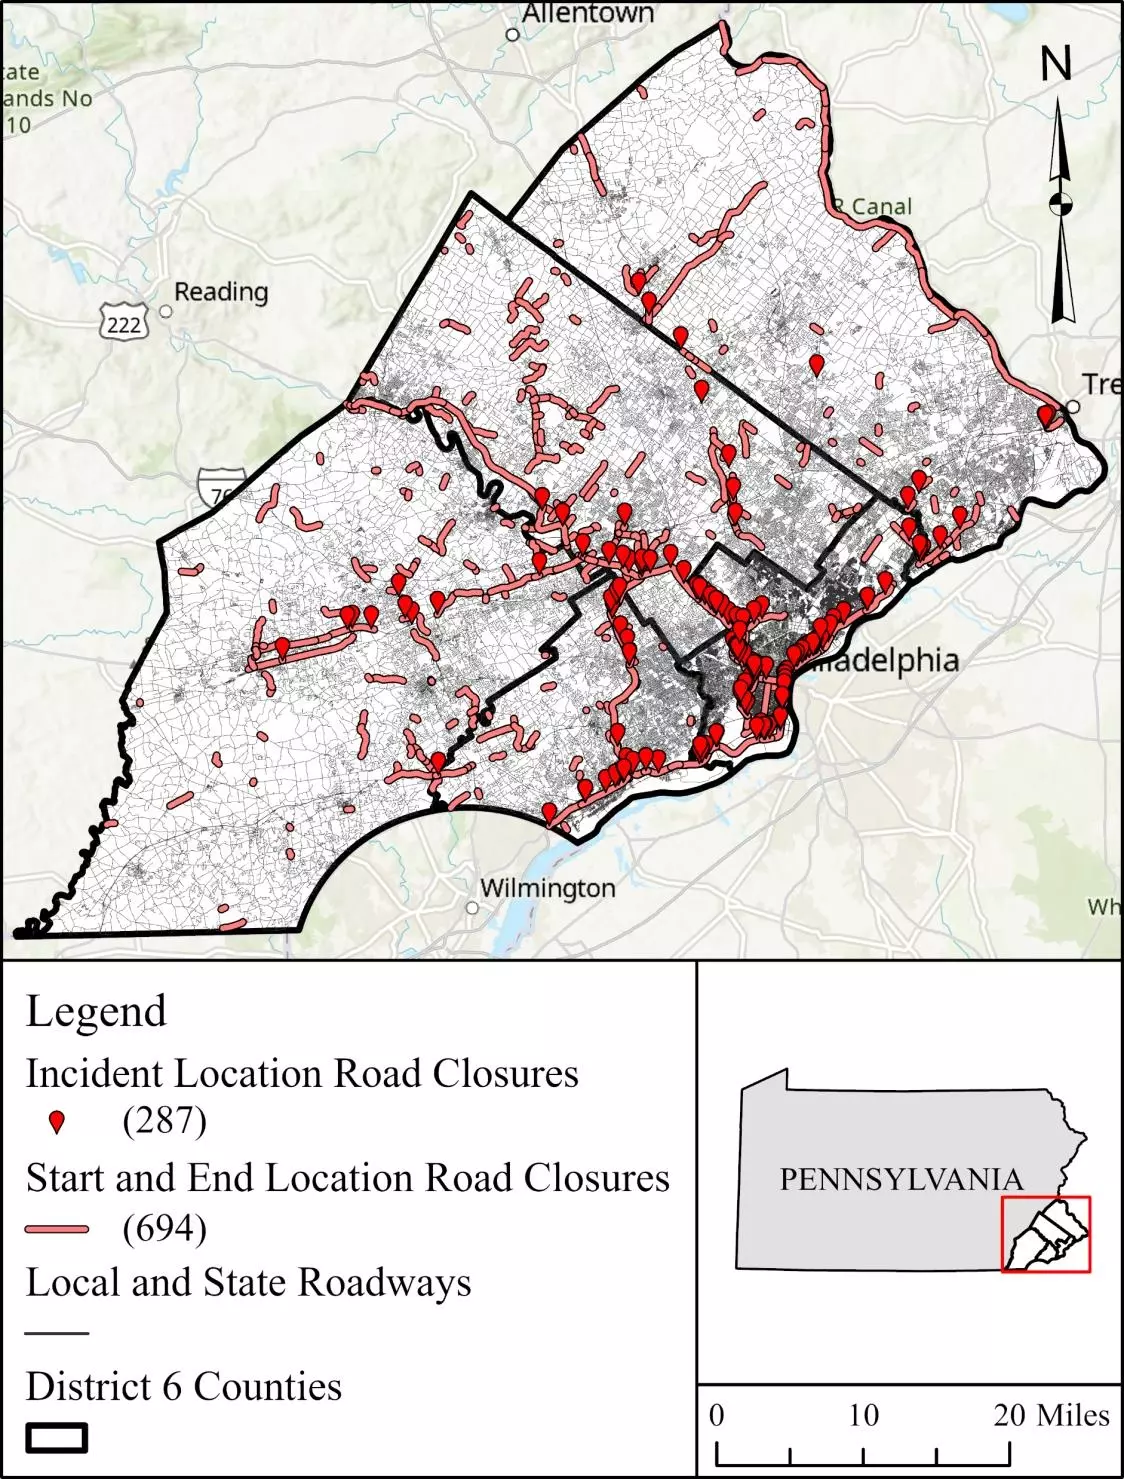 An image showing a map of Philadelphia and surrounding counties indicating road closures due to flooding in red.